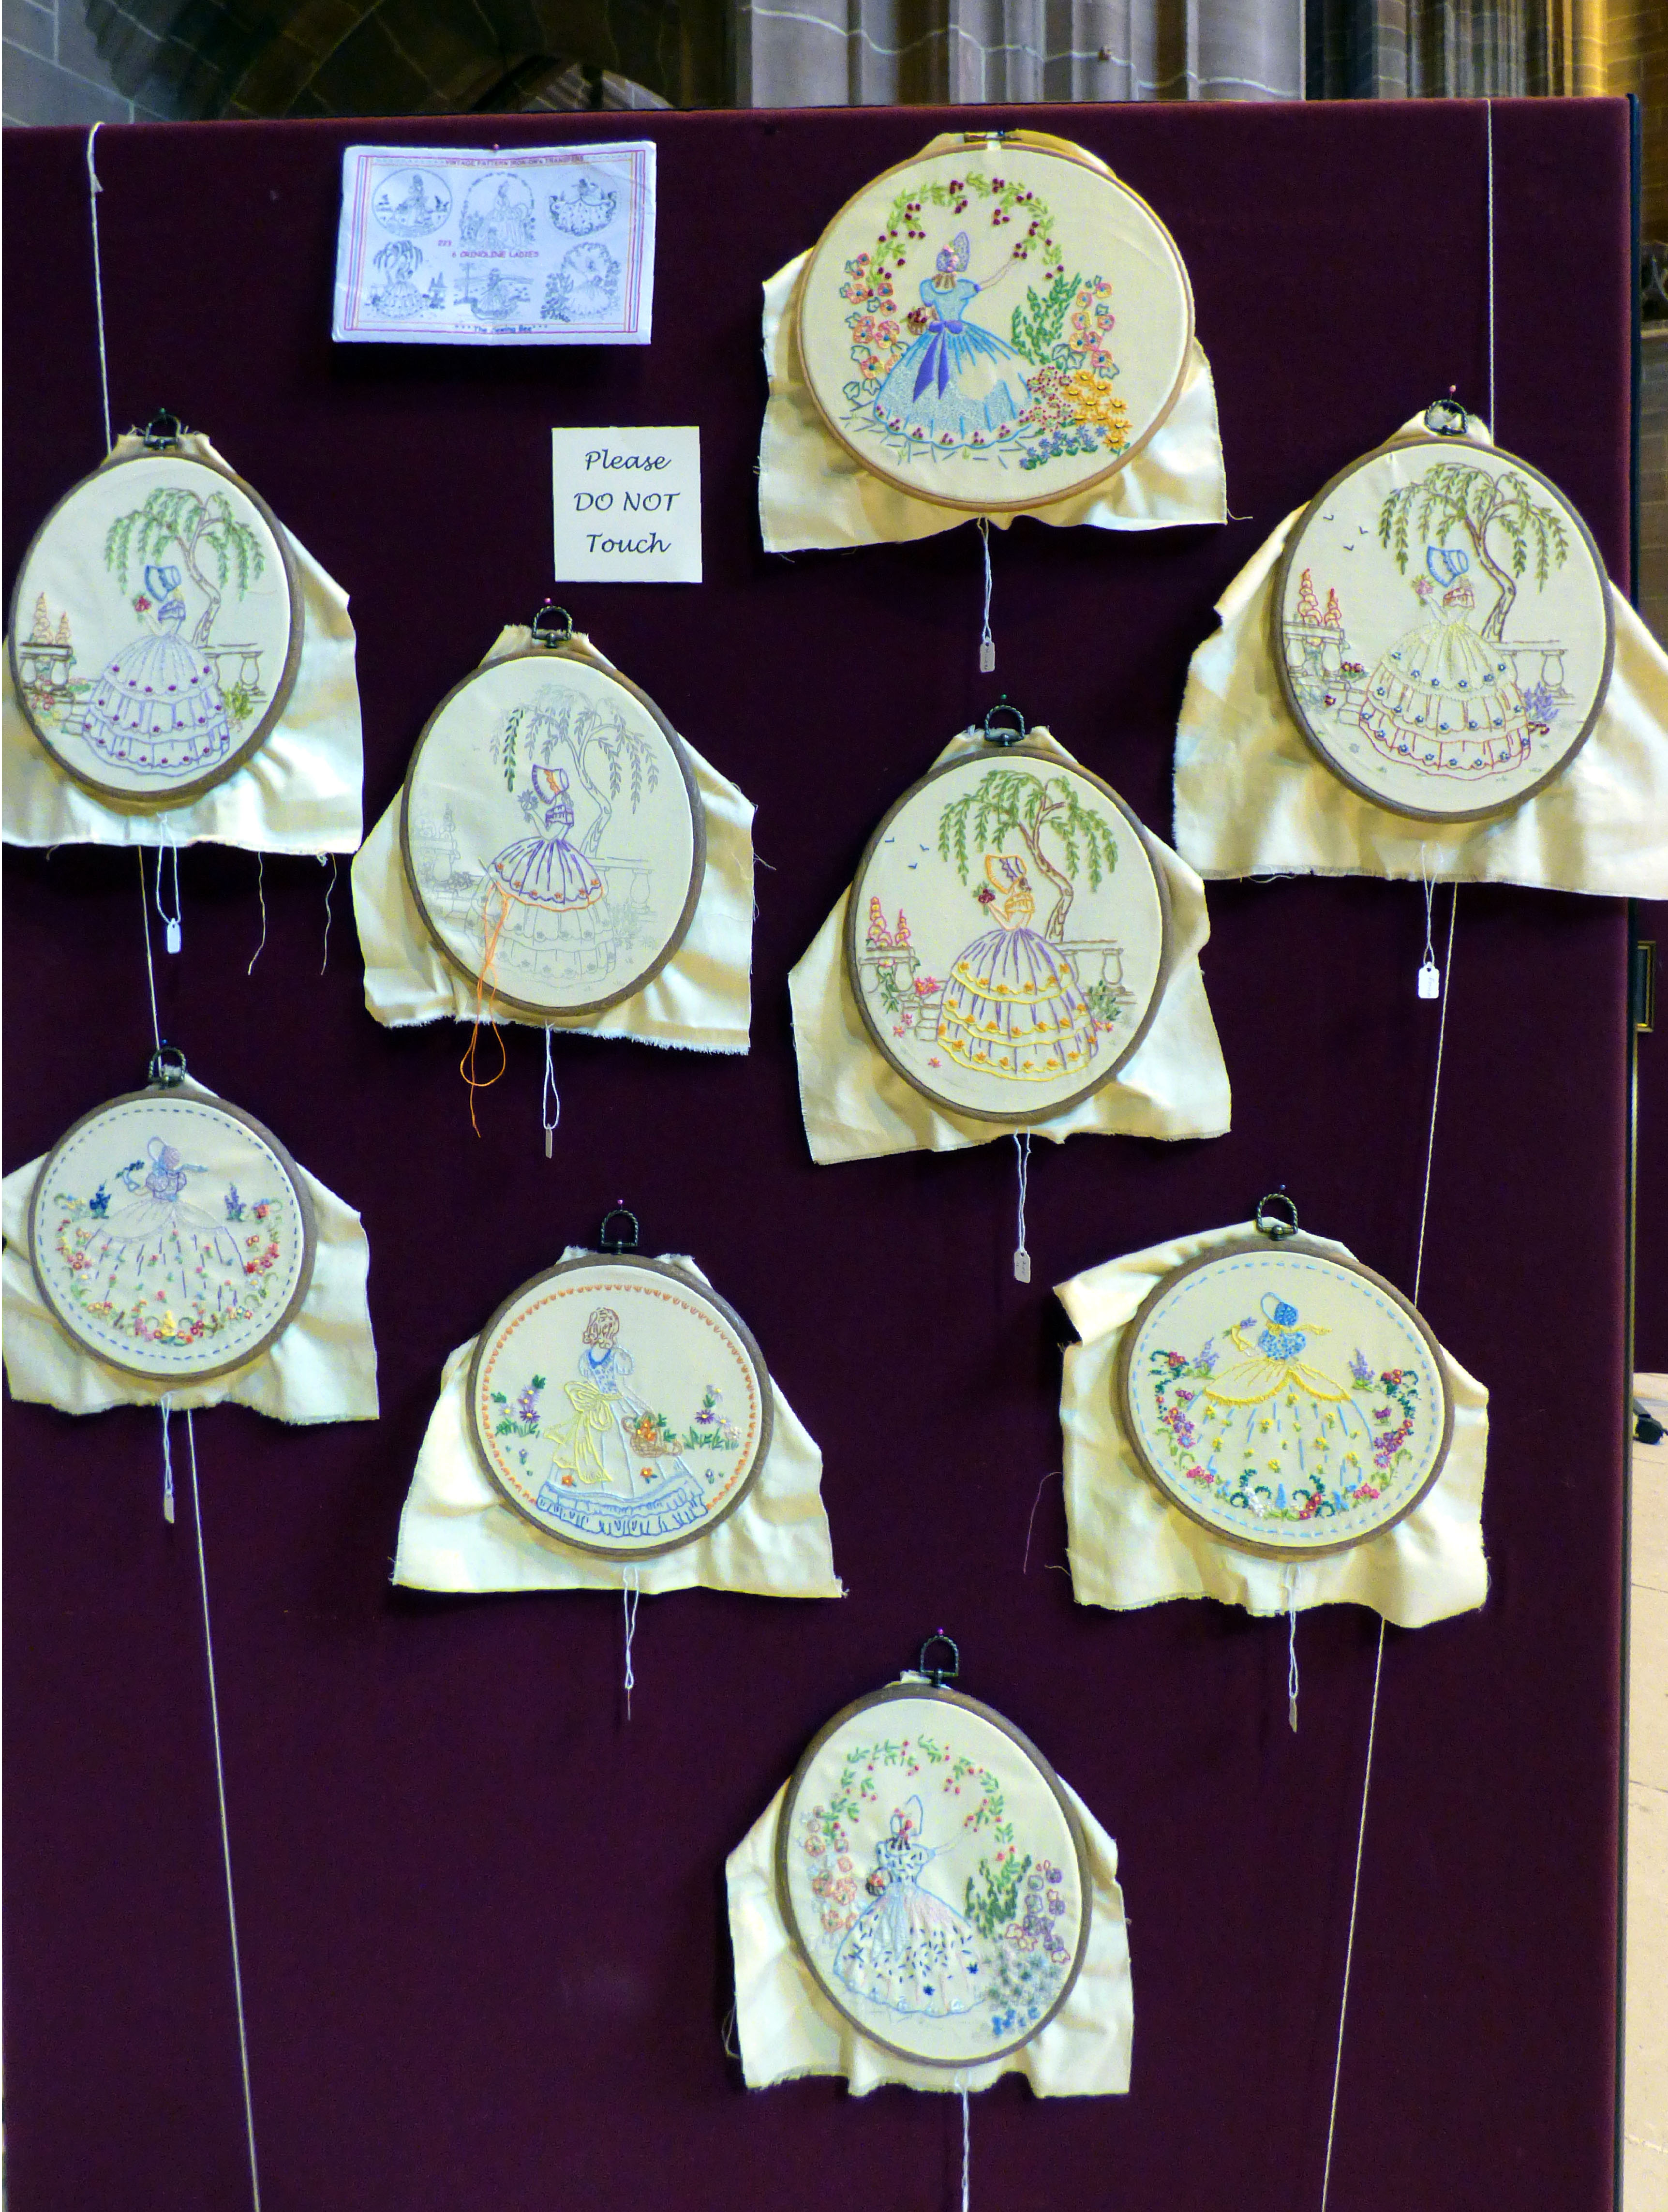 CRINOLINE LADIES by Merseyside Young Embroiderers at 60 Glorious Years exhibition, Liverpool Anglican Cathedral 2016